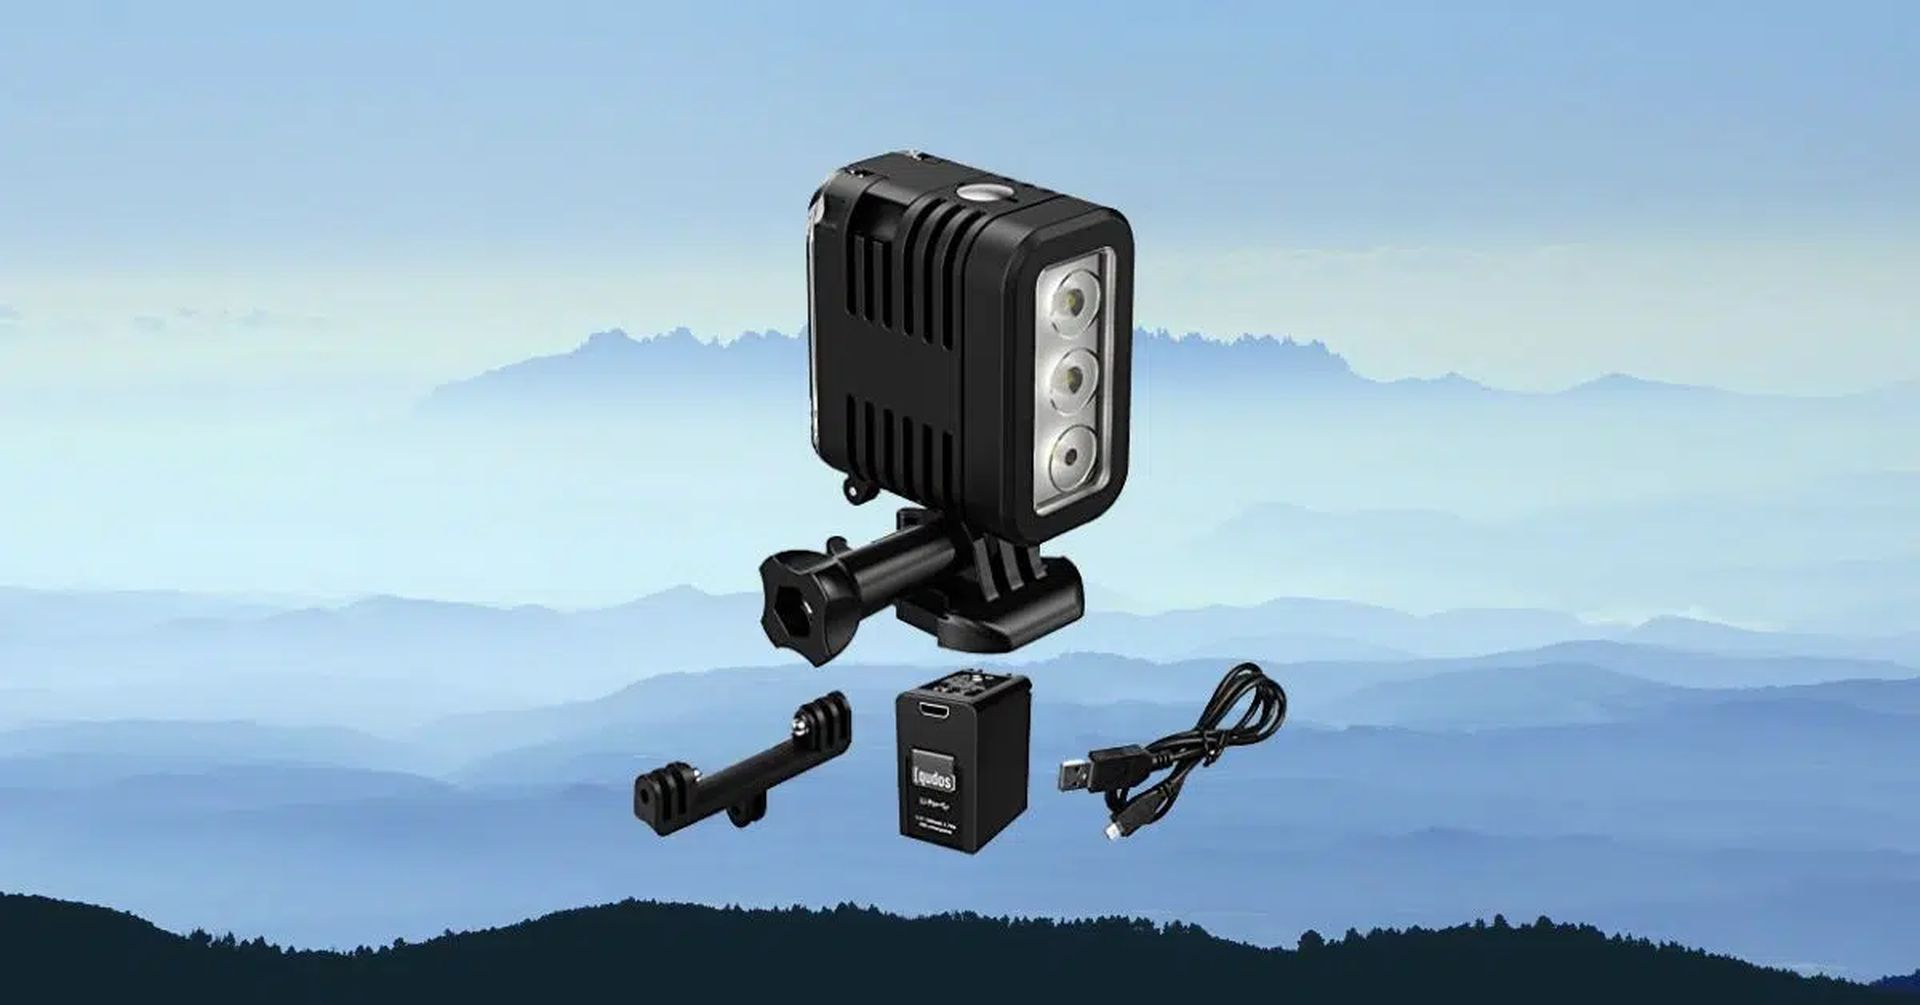 If you capture videos of your adventures with an action camera but struggle with low light, our best action camera flashlights (2022) is just the thing for you.